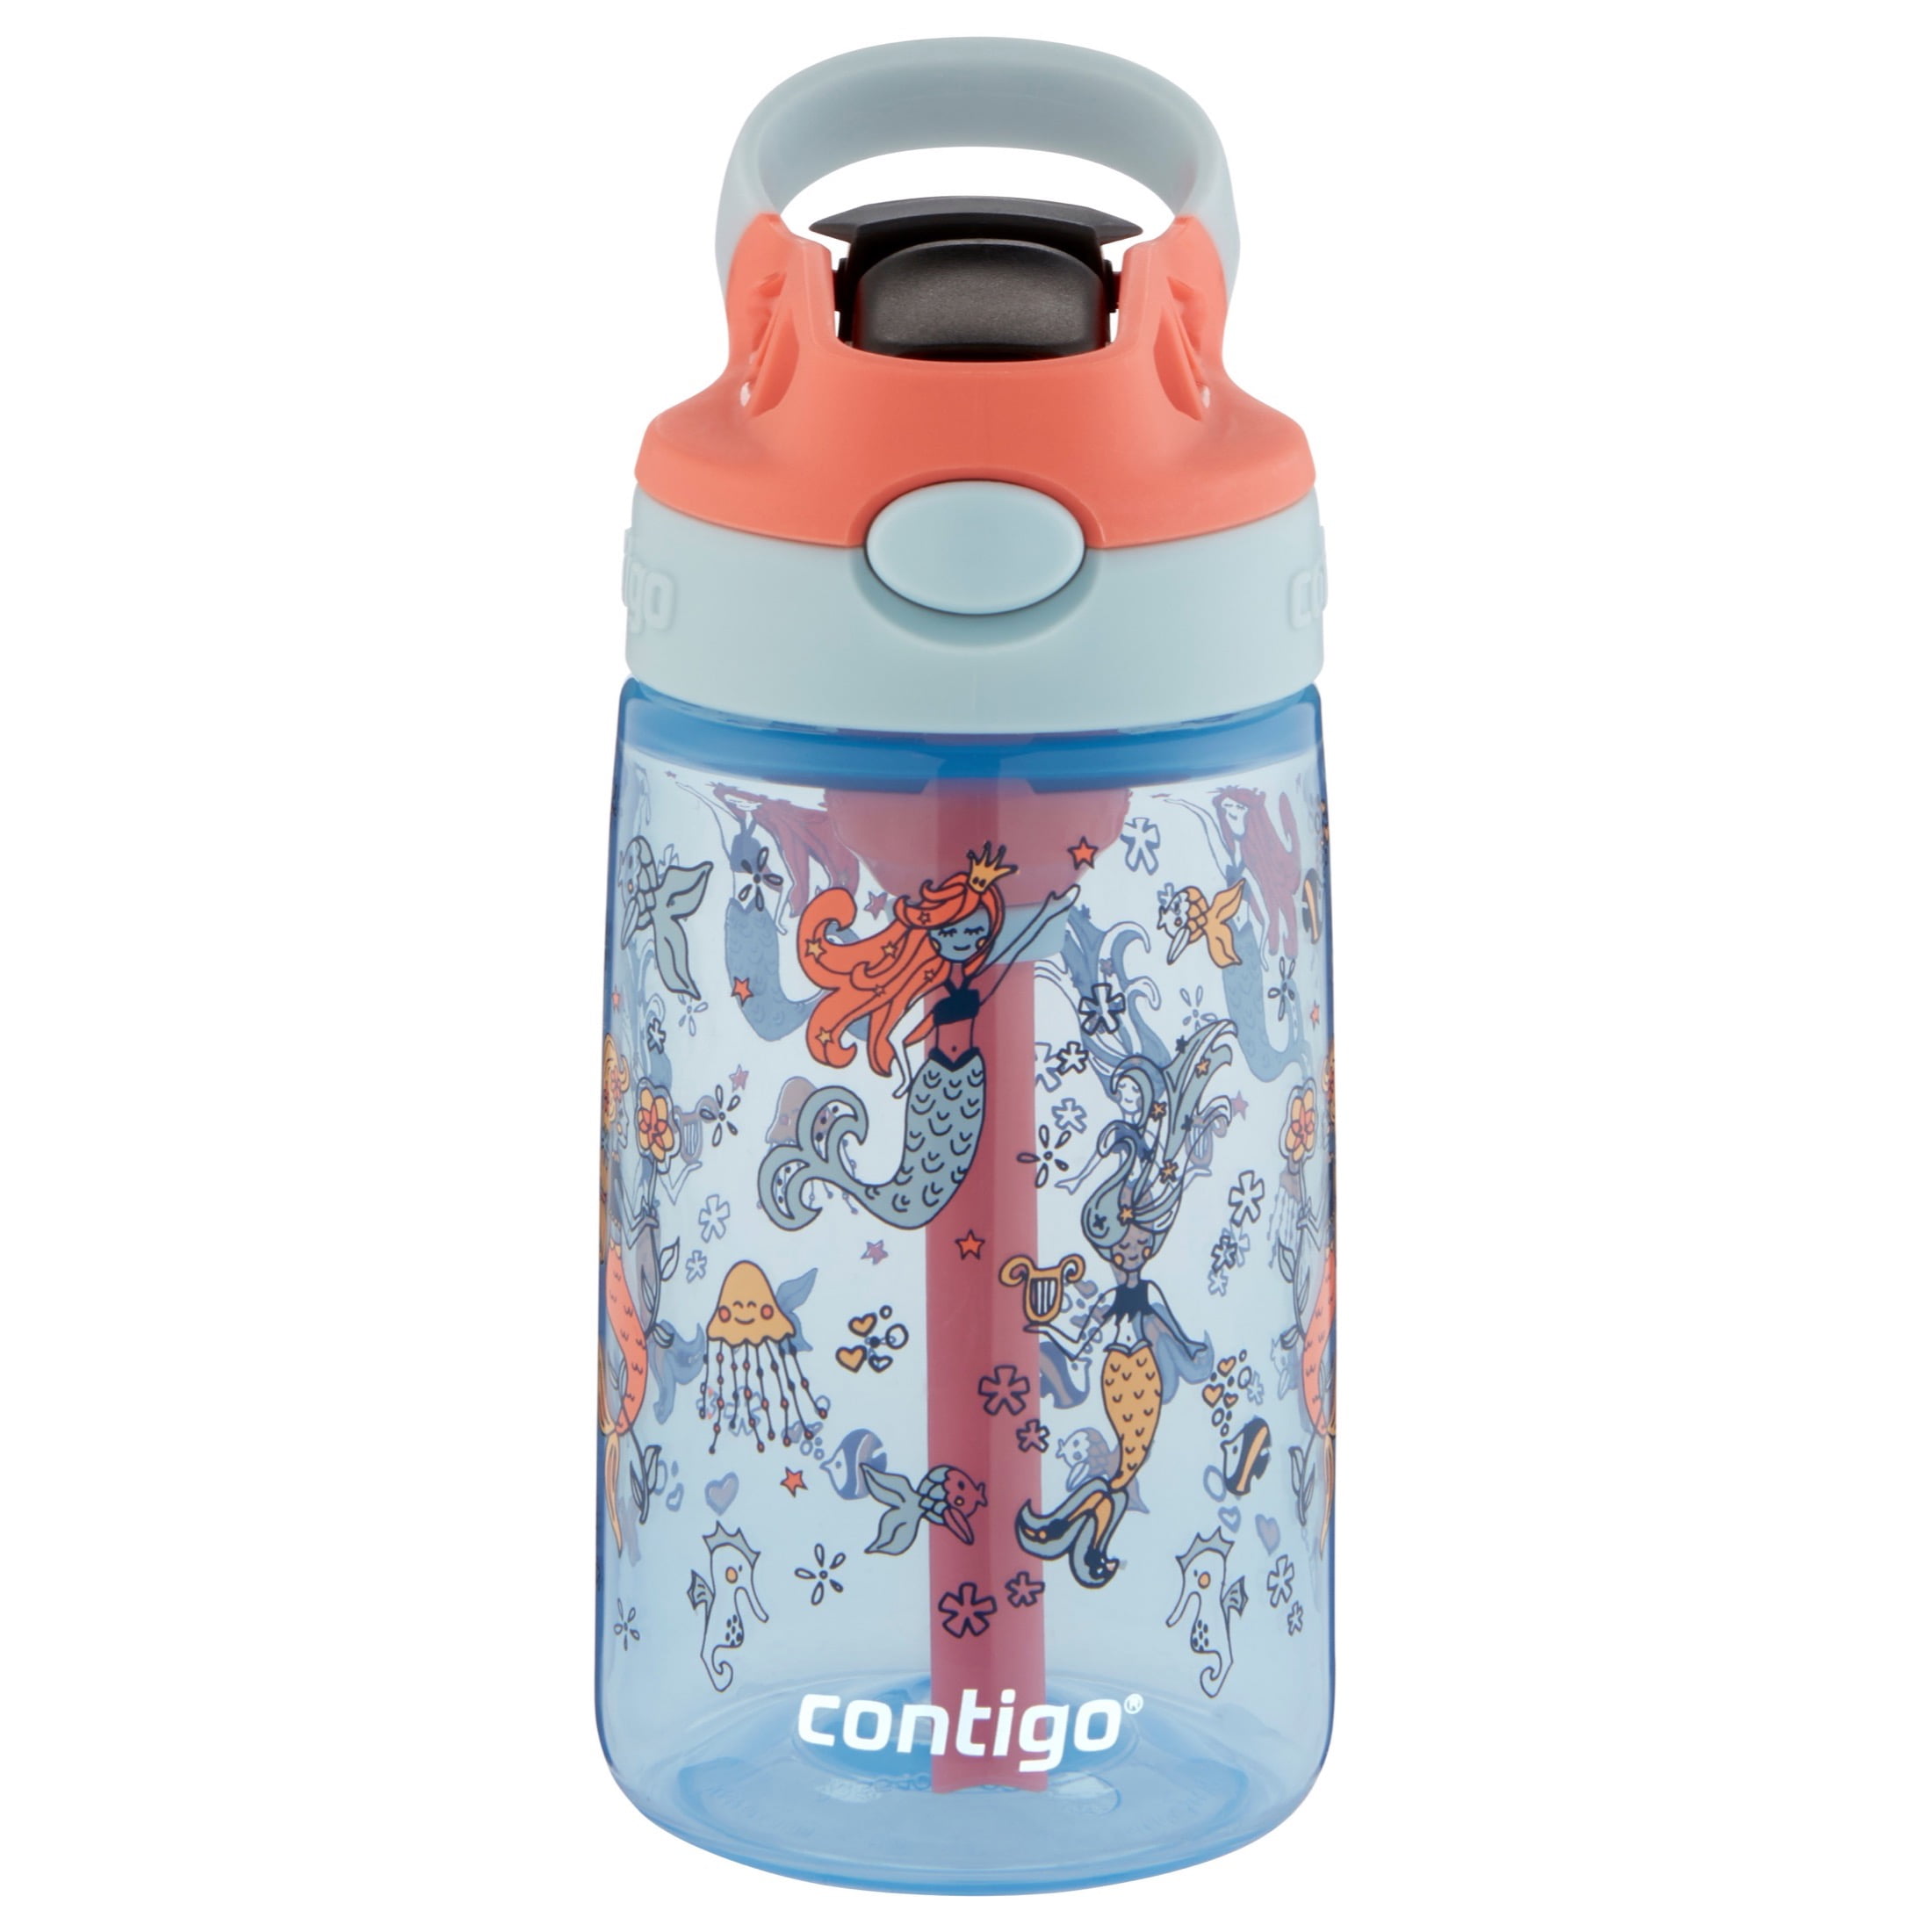 New Contigo® Water Bottles Put Innovative Spin On Hydration For Kids And  Tweens